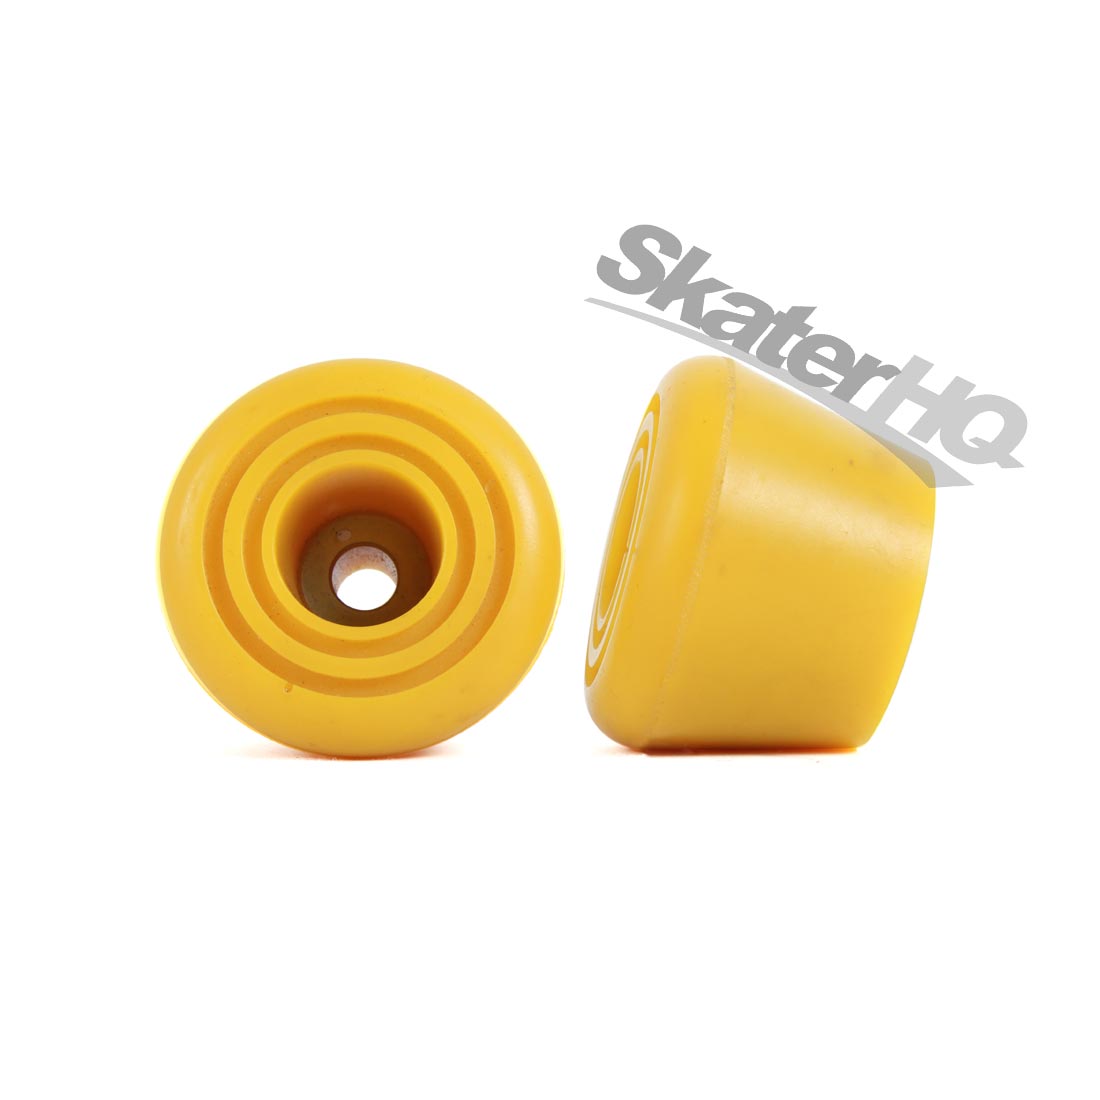 Roller Skate High Bell Stoppers - Yellow Roller Skate Hardware and Parts